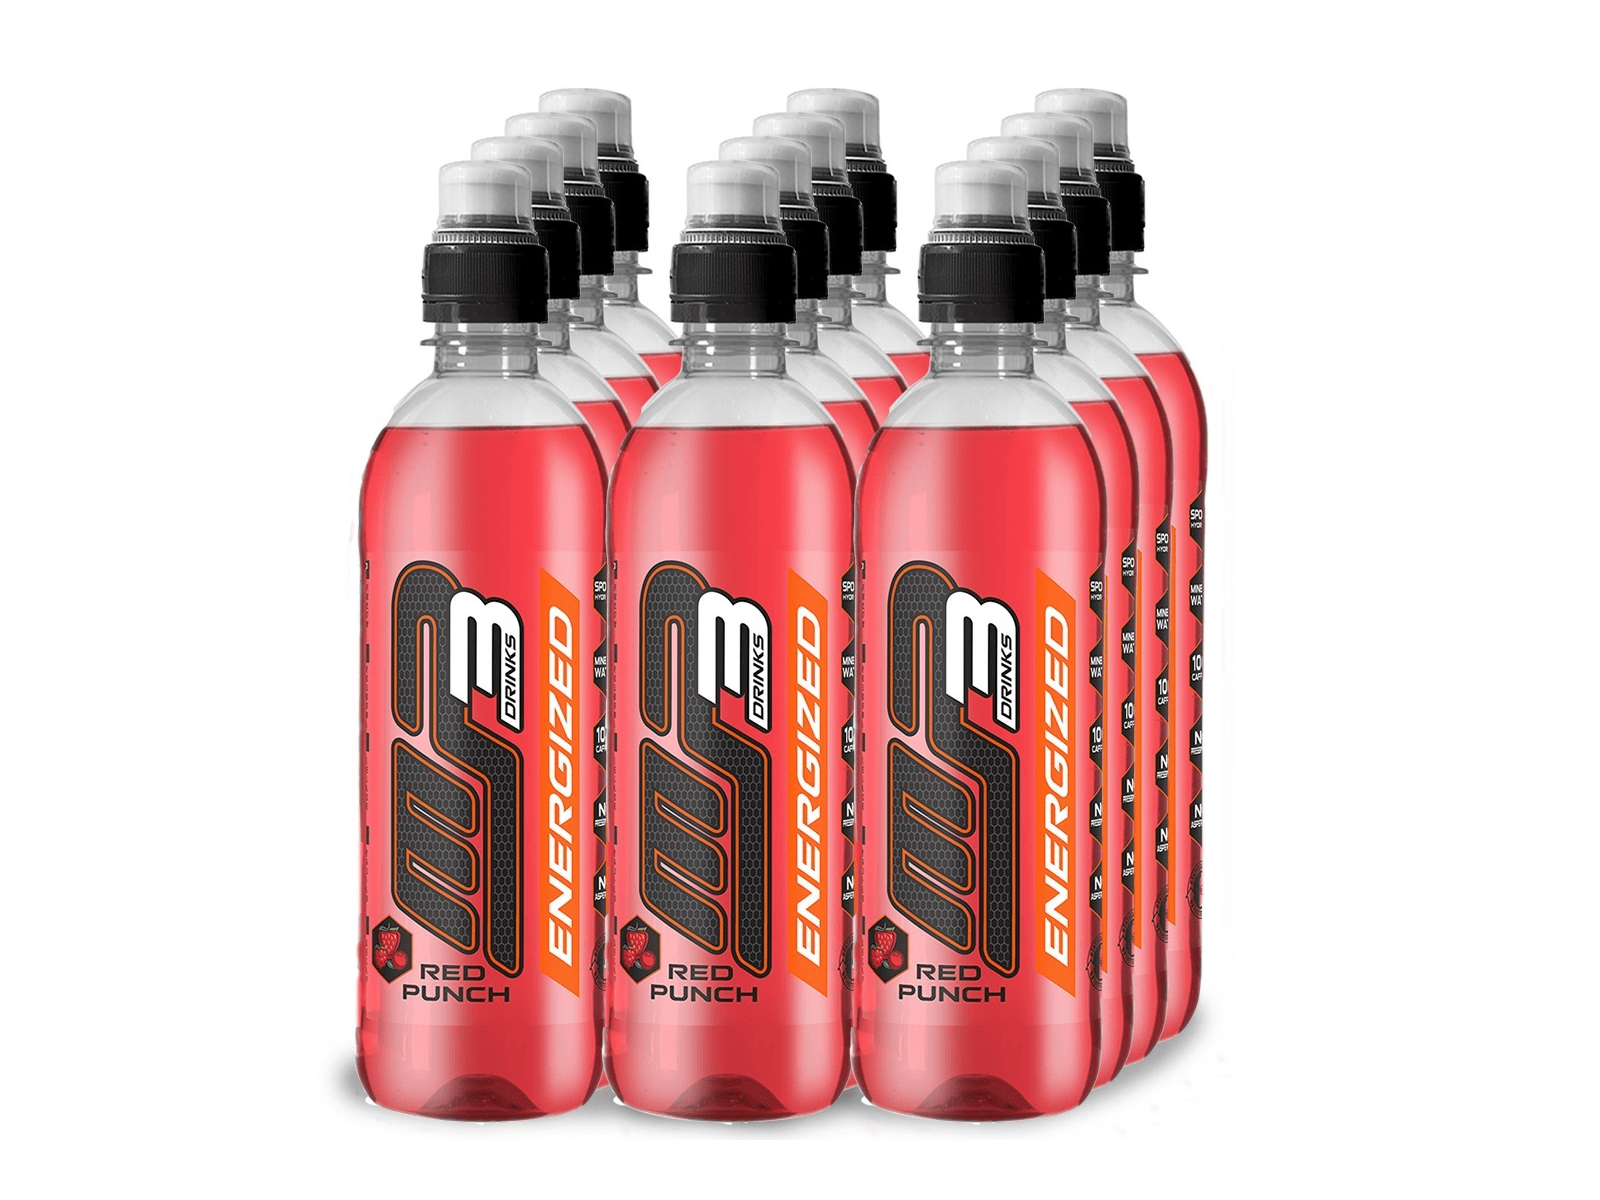 MP3 Drinks - Energized (12-pack) (Red Punch - 12 x 500 ml)